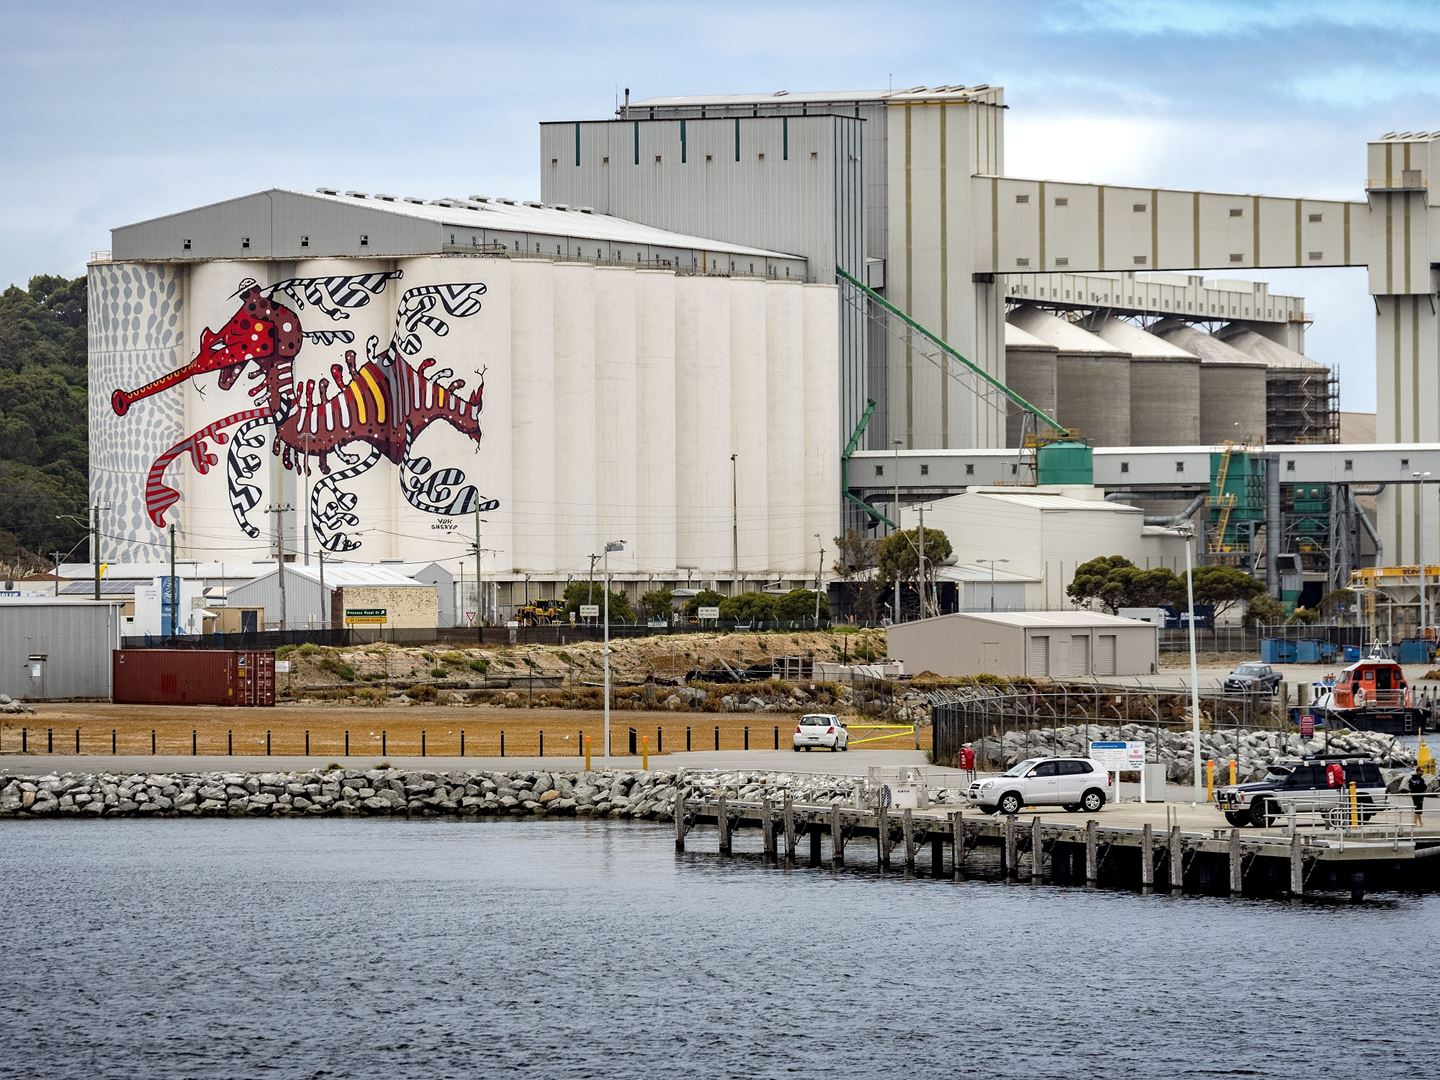 Albany Grain Terminal silos featuring a seadragon mural on the side. Photo by Bewley Shaylor